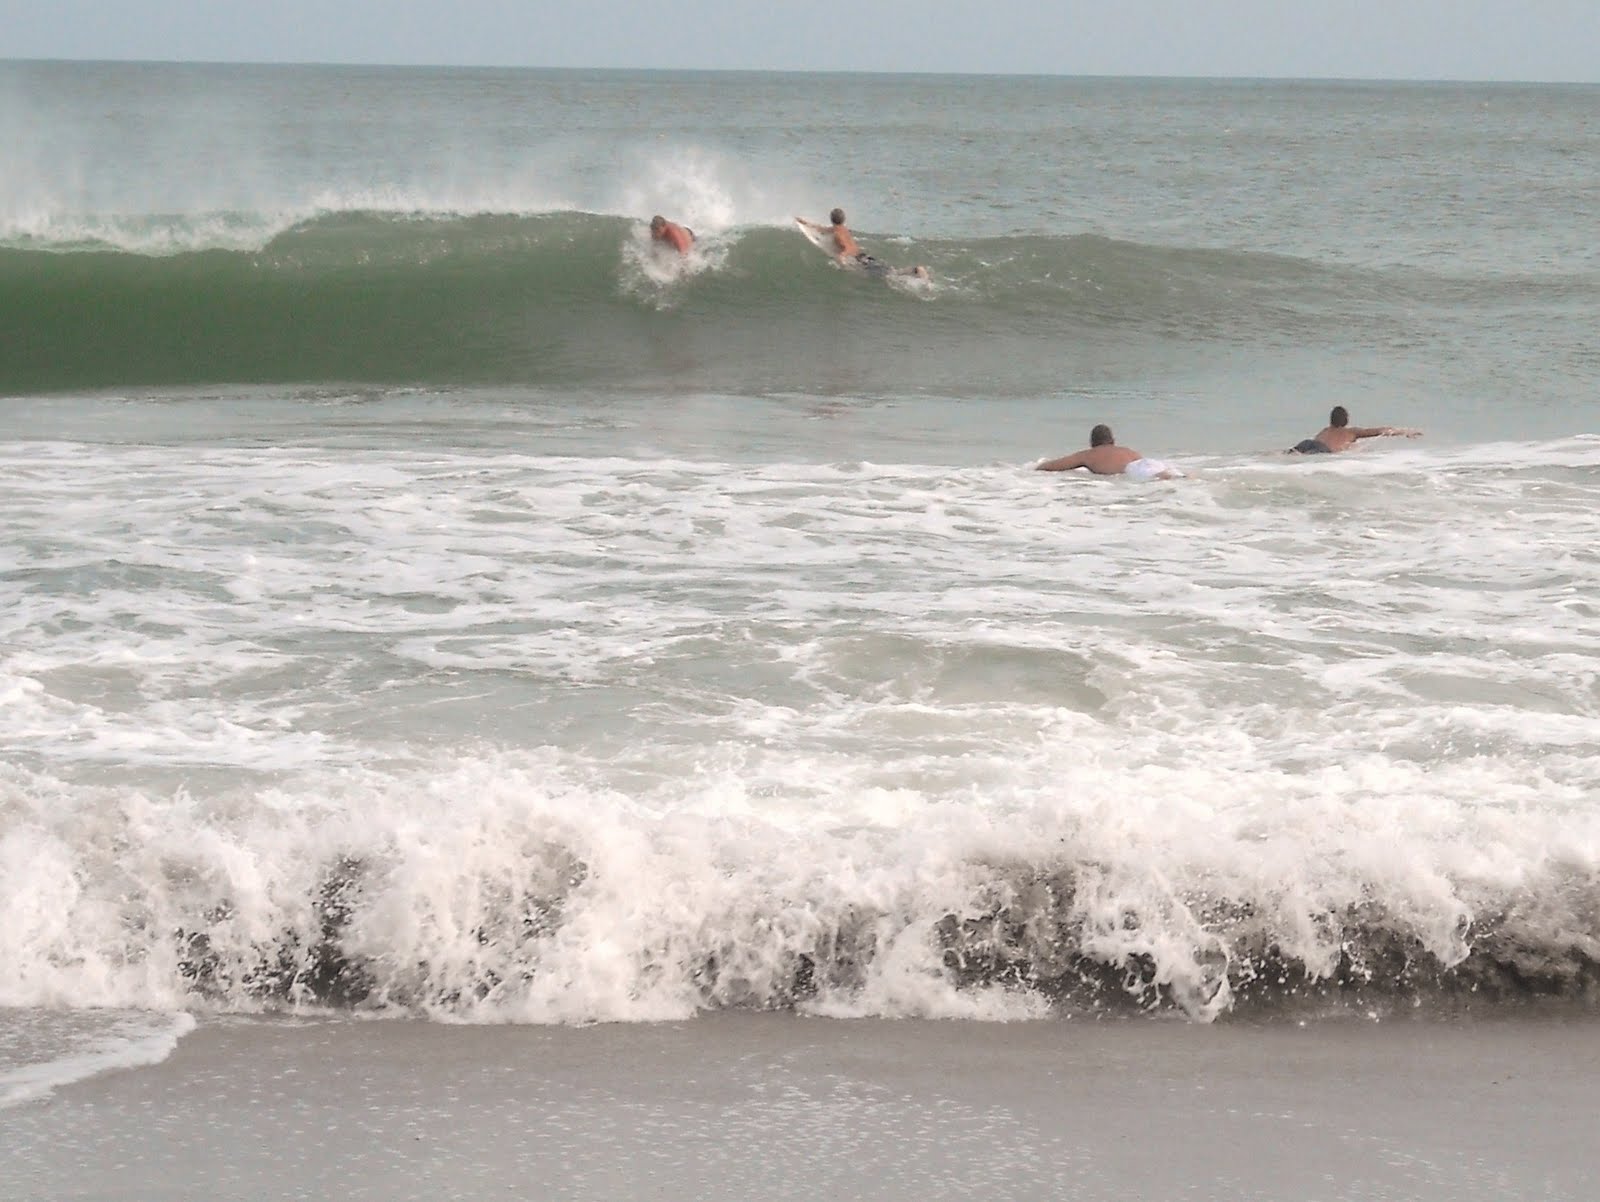 Beauty of Bamboo: Surfing in Myrtle Beach!